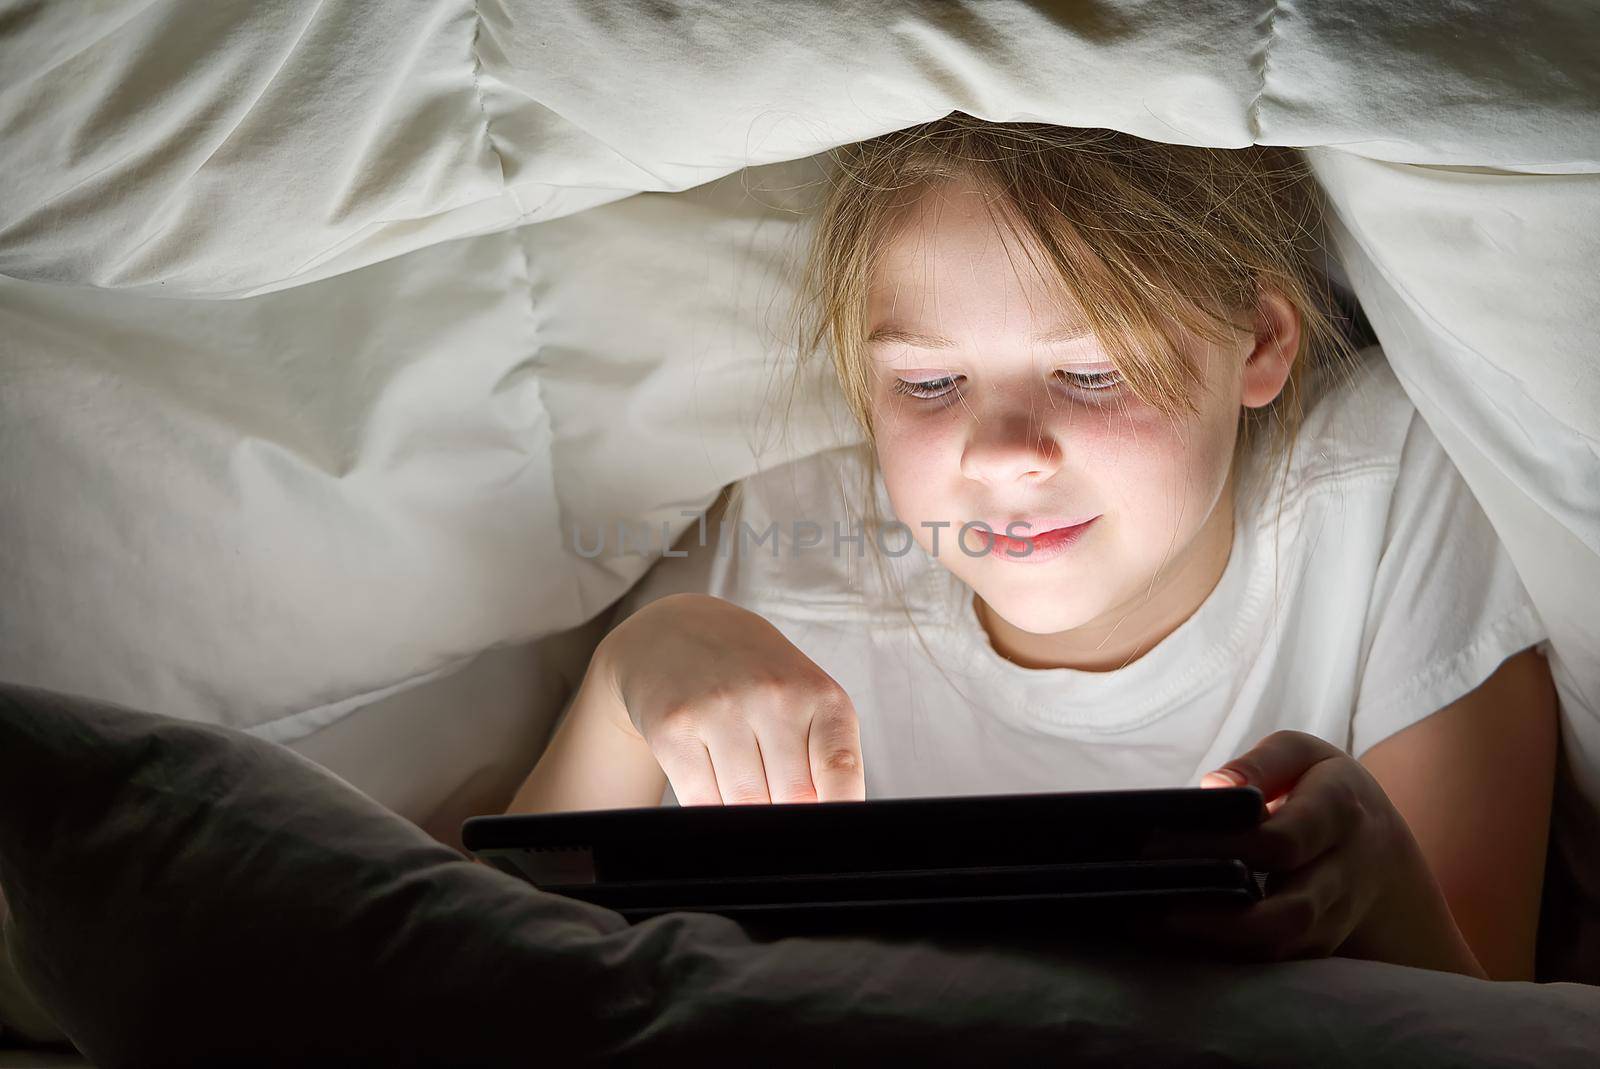 Gadget night. Romantic chat. Late home leisure. Online communication. Portrait of girl with mobile phone under blanket at night. cyber bullying